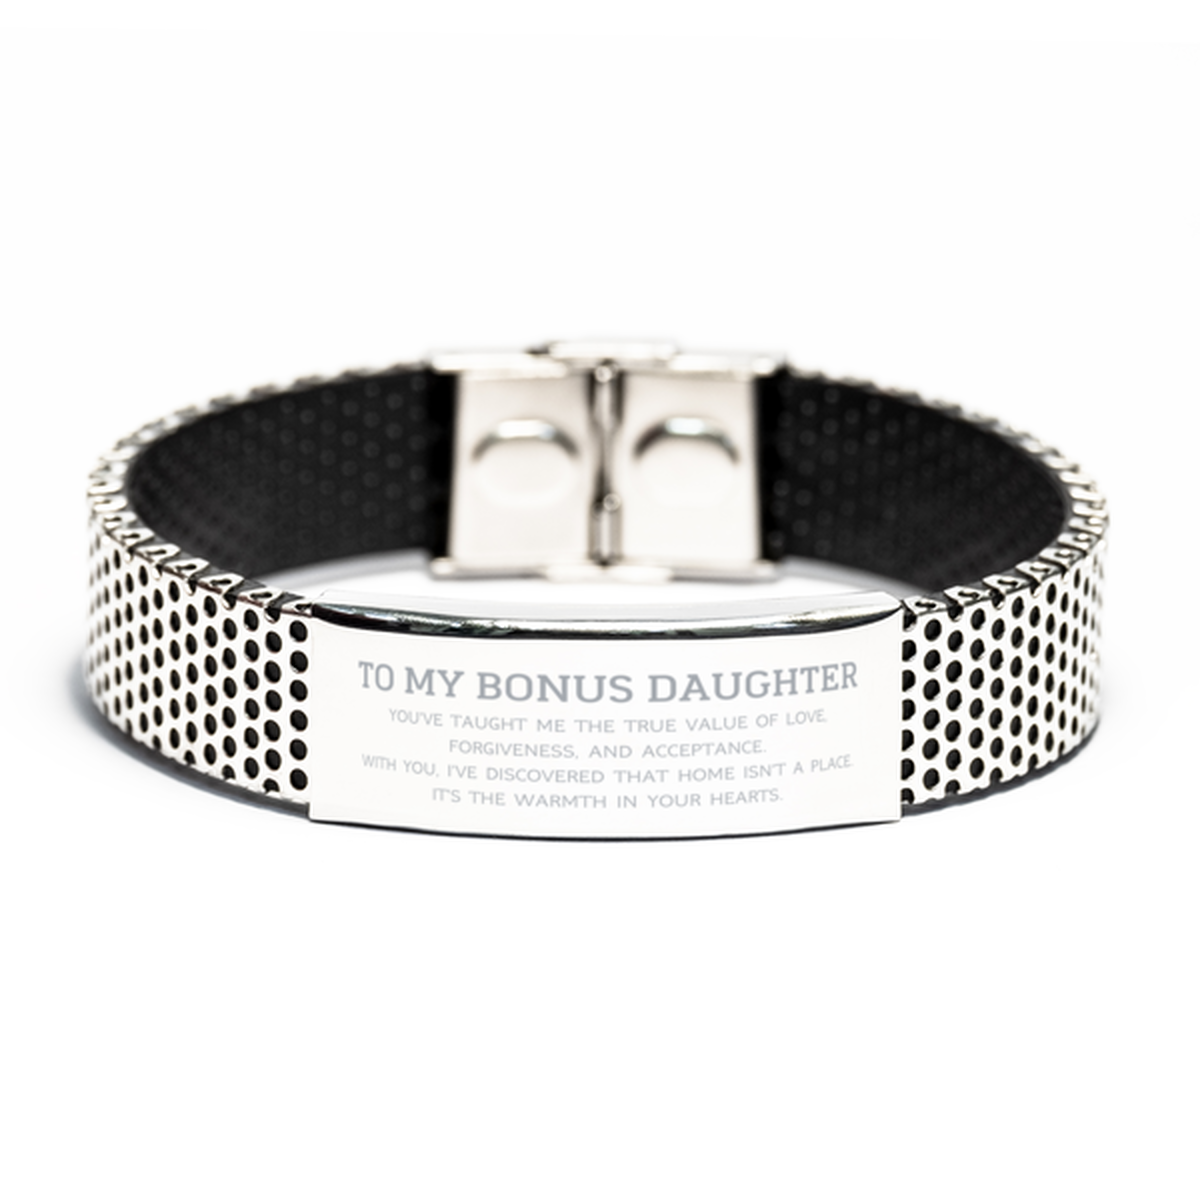 To My Bonus Daughter Gifts, You've taught me the true value of love, Thank You Gifts For Bonus Daughter, Birthday Stainless Steel Bracelet For Bonus Daughter